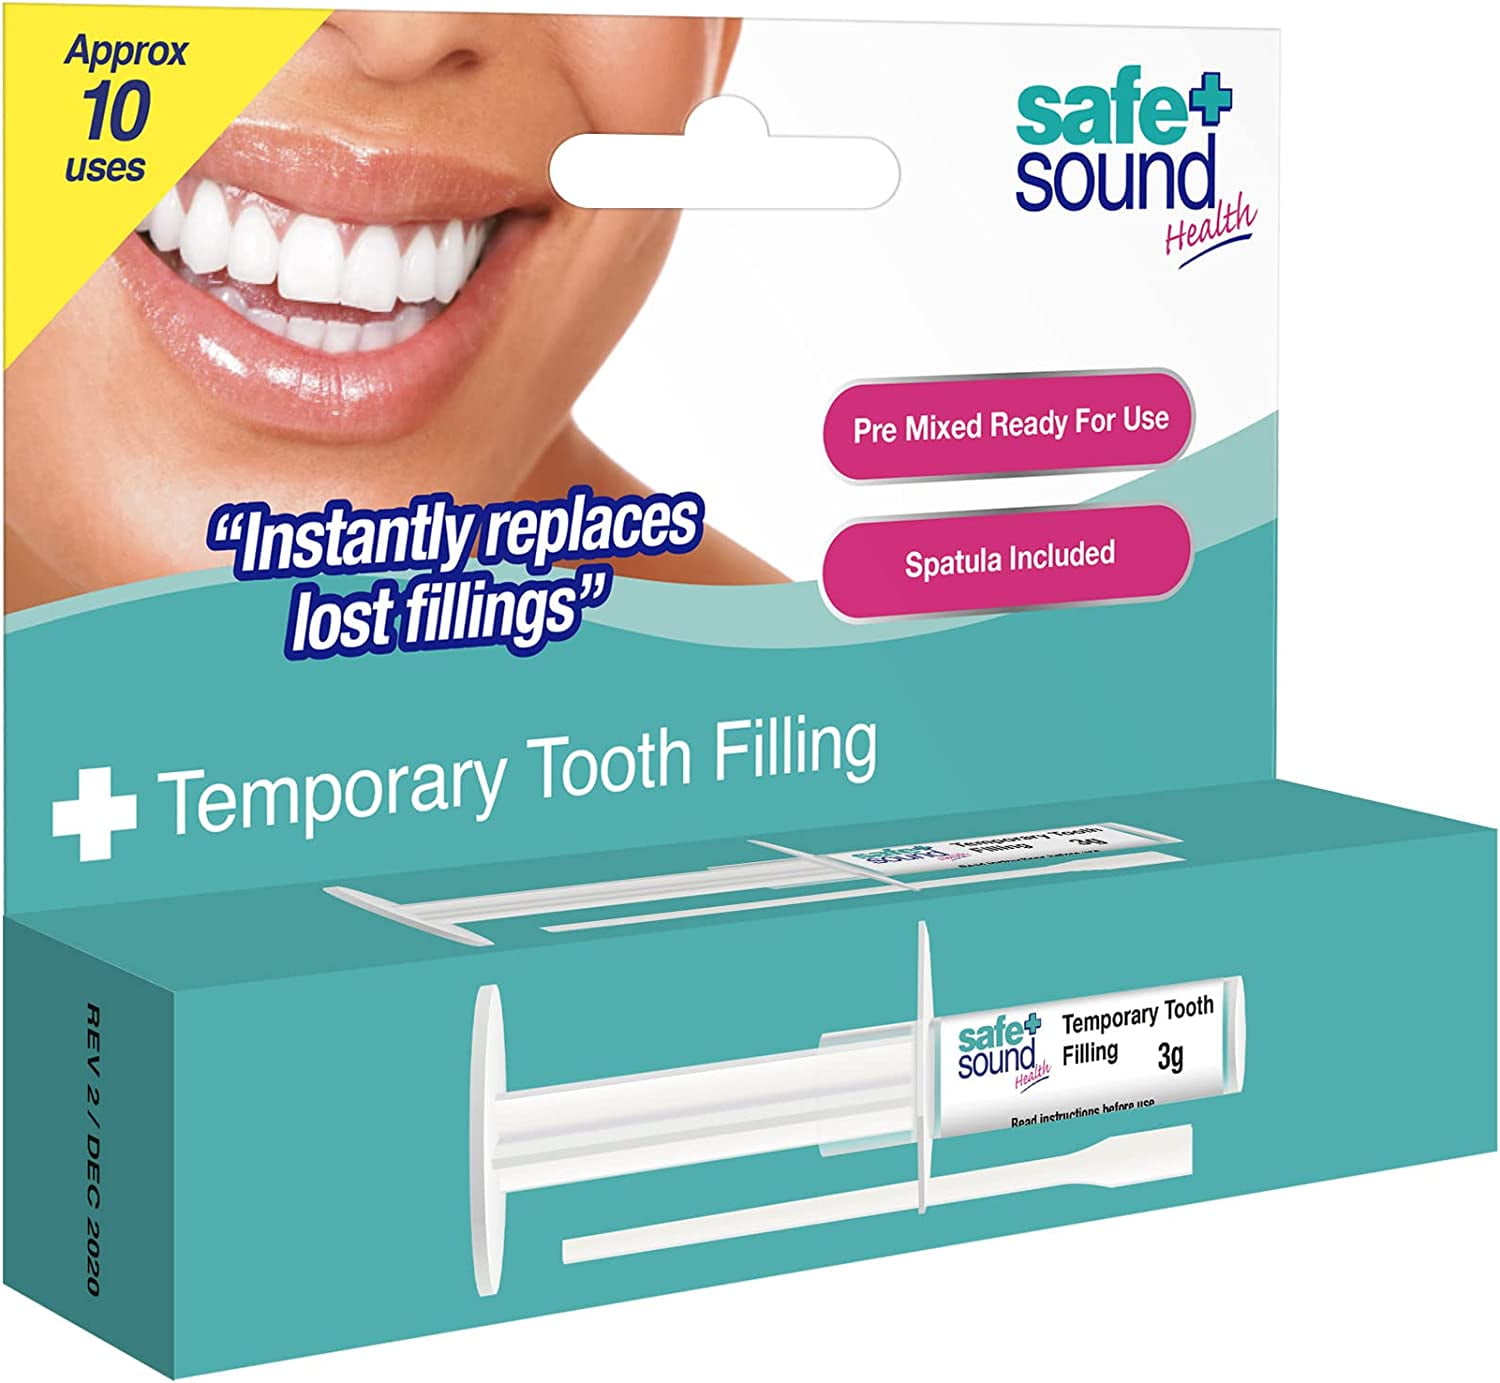 Are Temporary Tooth Filling Kits Safe?